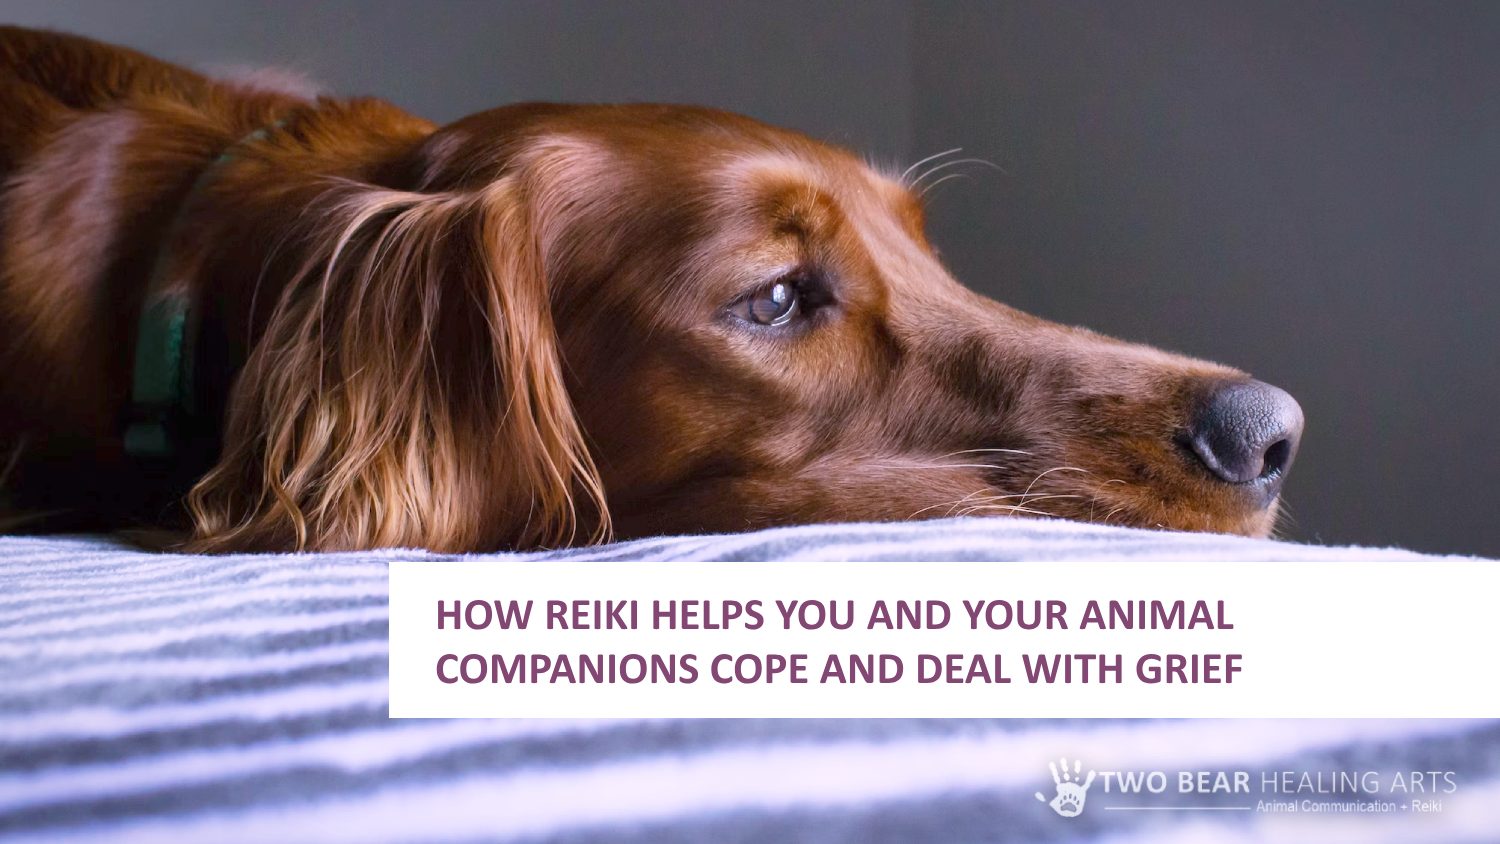 How Reiki Helps You And Your Animal Companions Cope And Deal With Grief